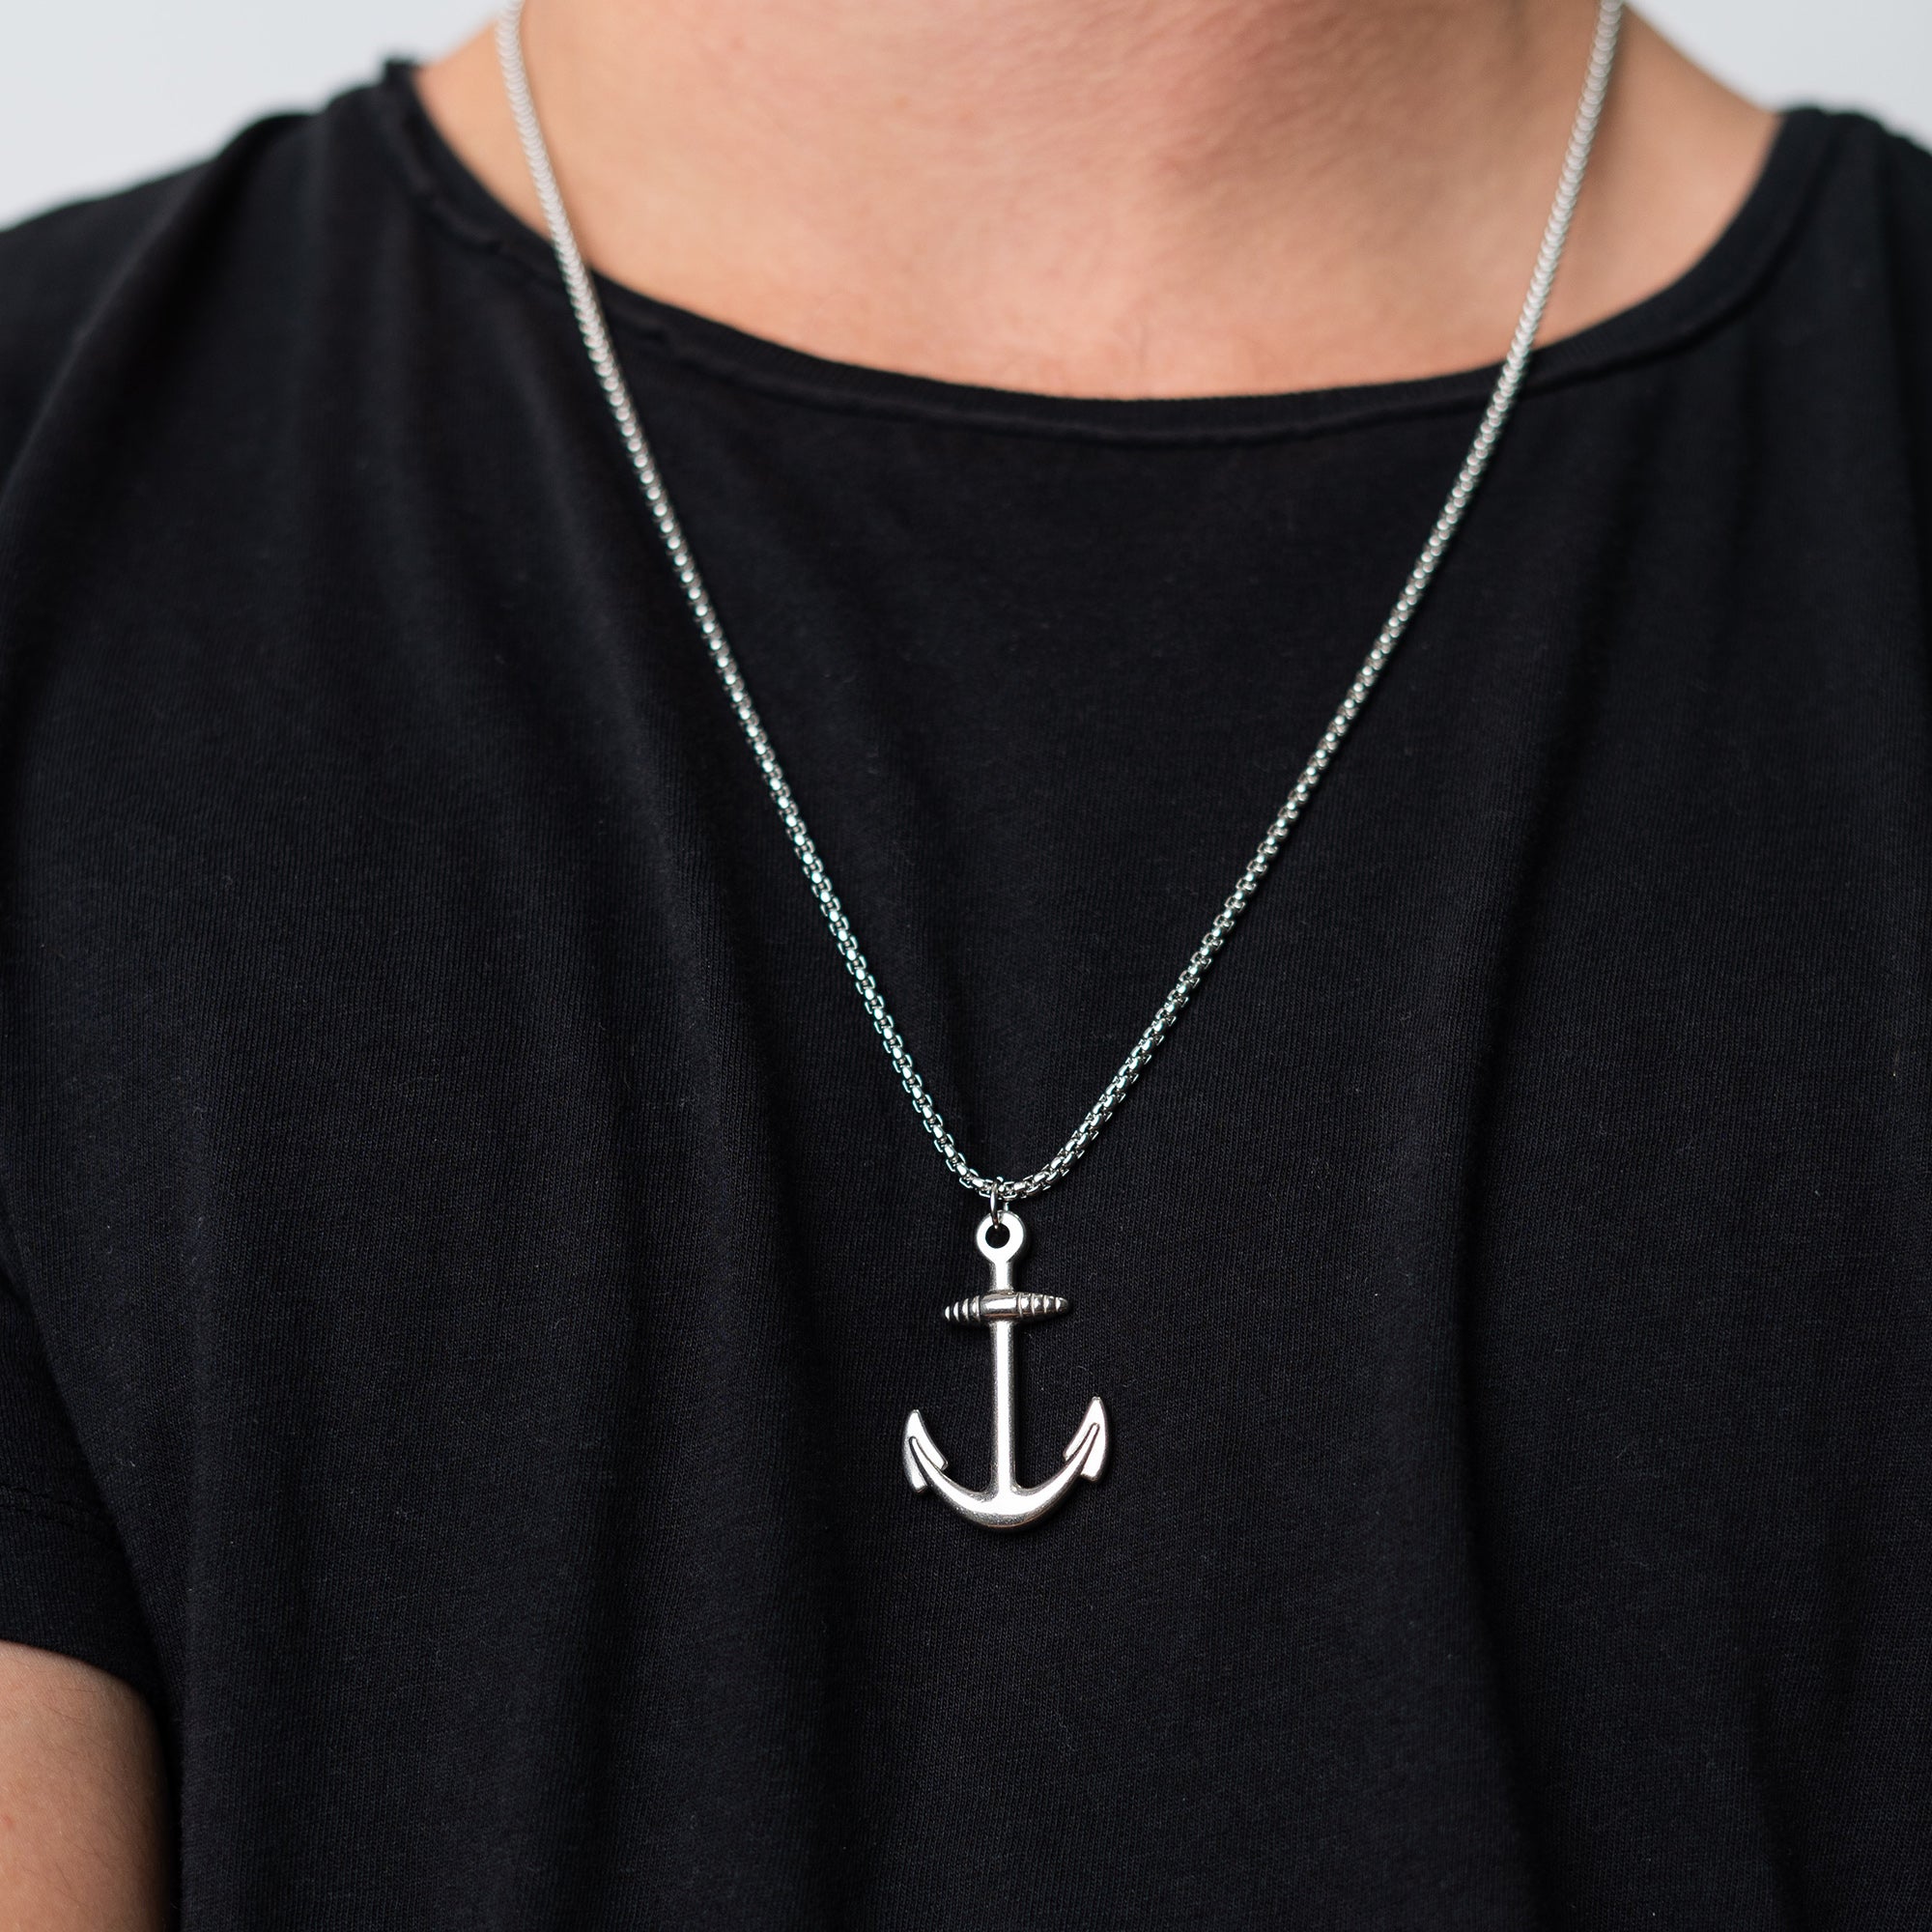 Anchor Necklace (Silver-Plated)